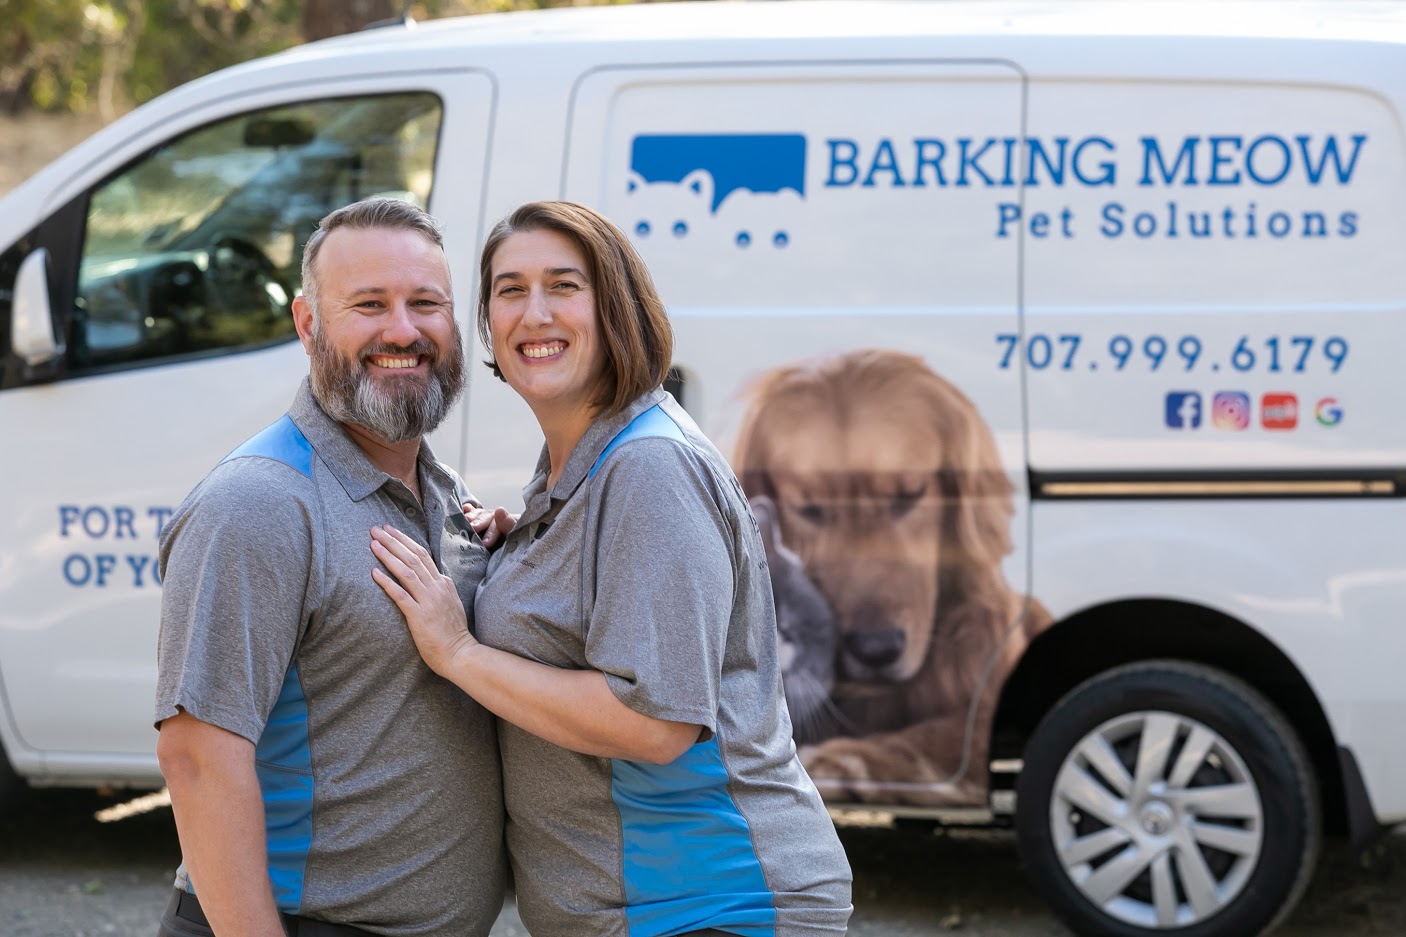 Barking Meow Pet Solutions